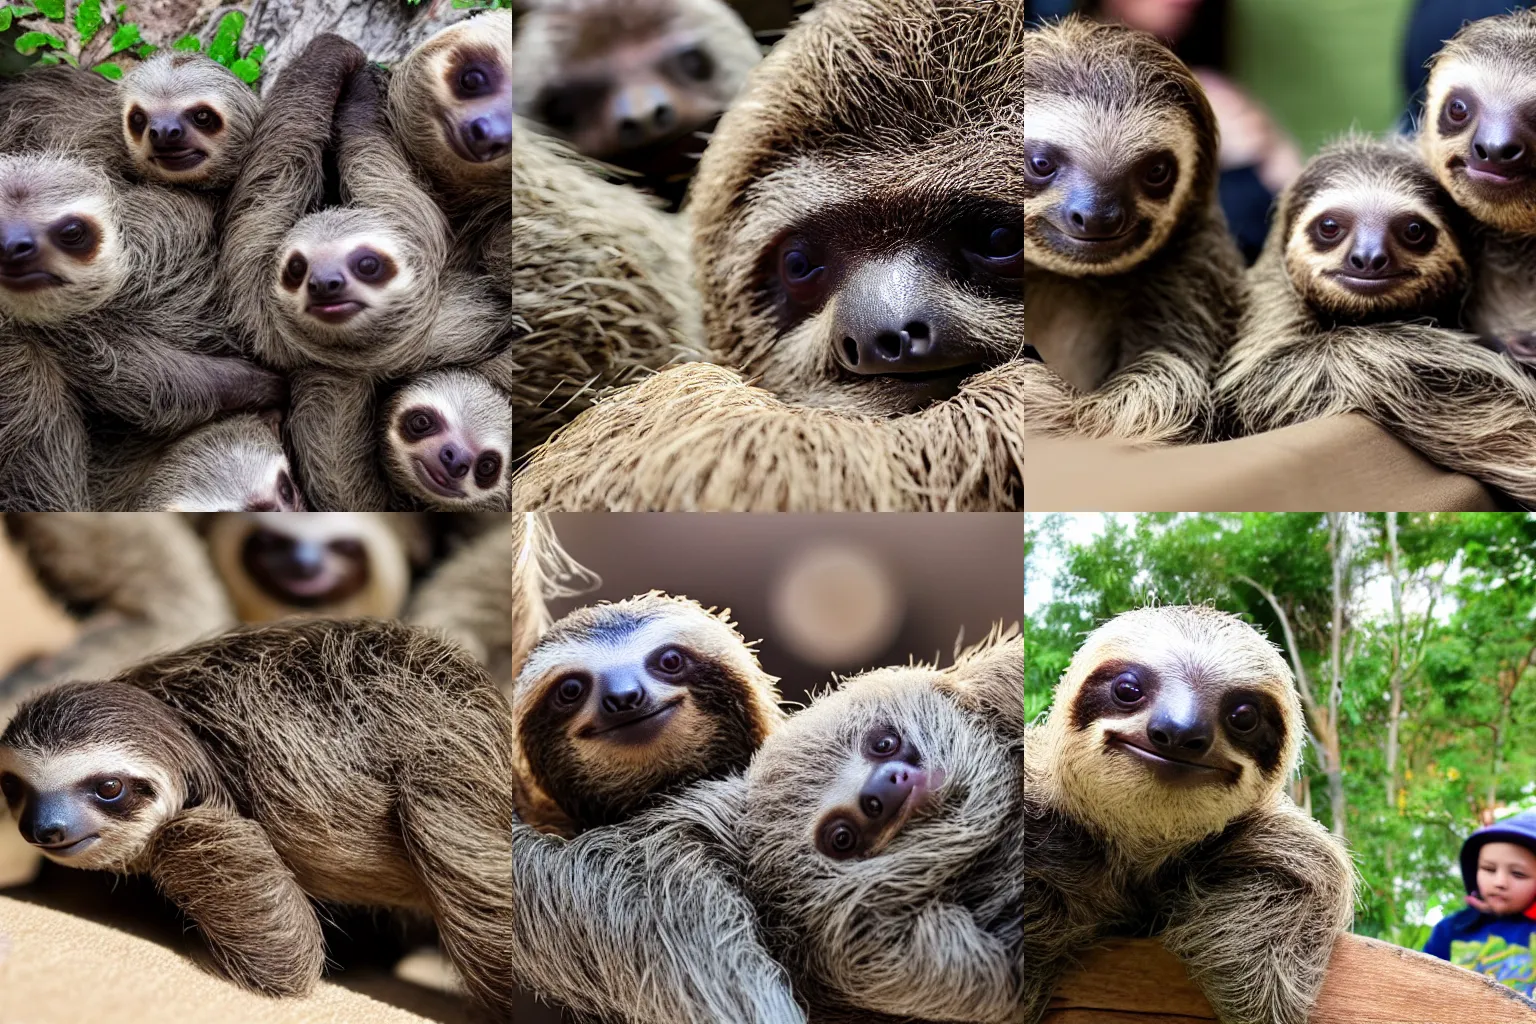 Prompt: a baby sloth parade, wide angled lens, with grand stands, onlookers, highly detailed photograph